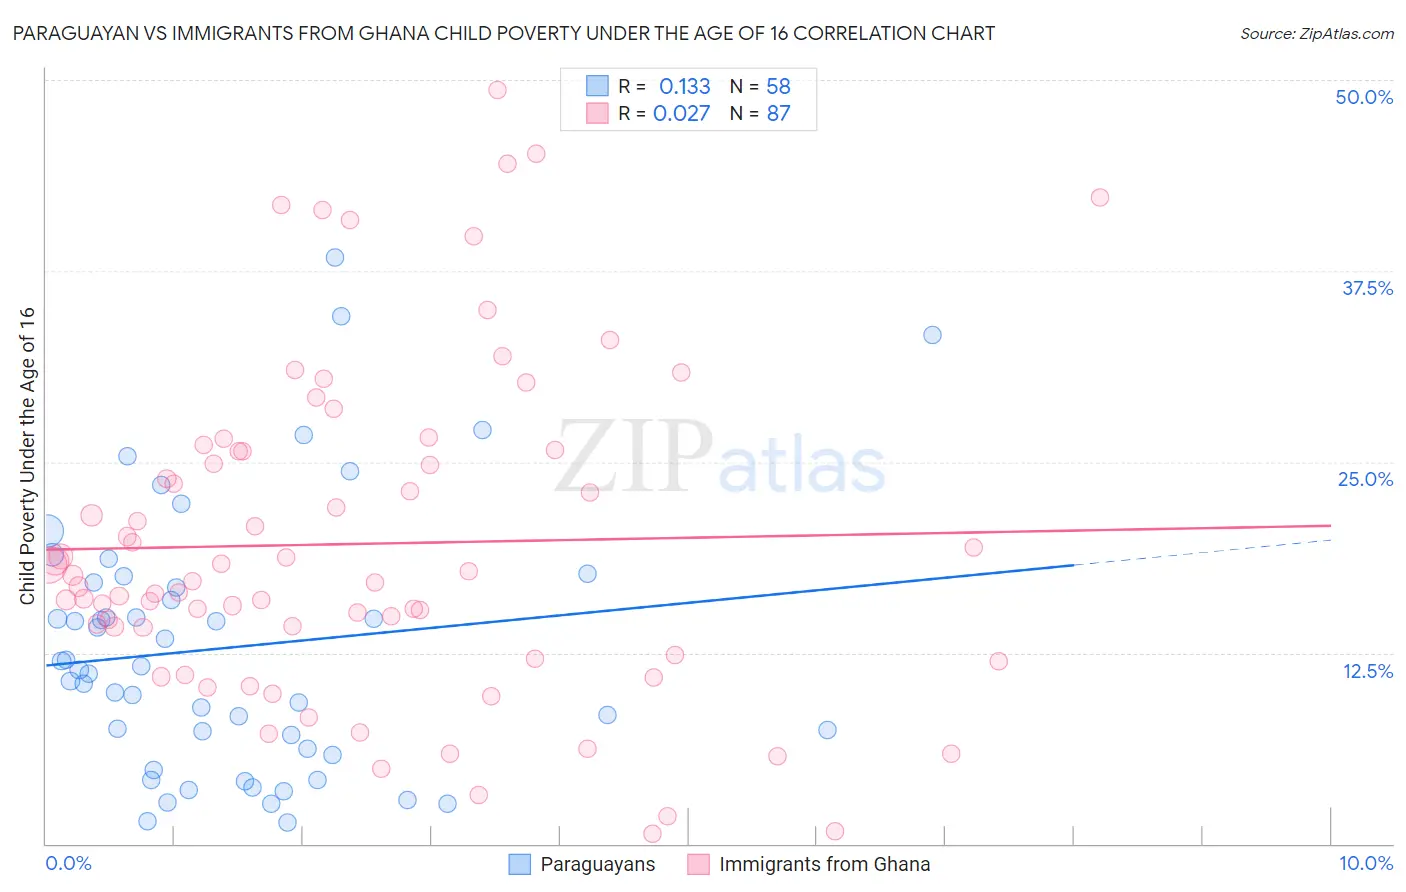 Paraguayan vs Immigrants from Ghana Child Poverty Under the Age of 16